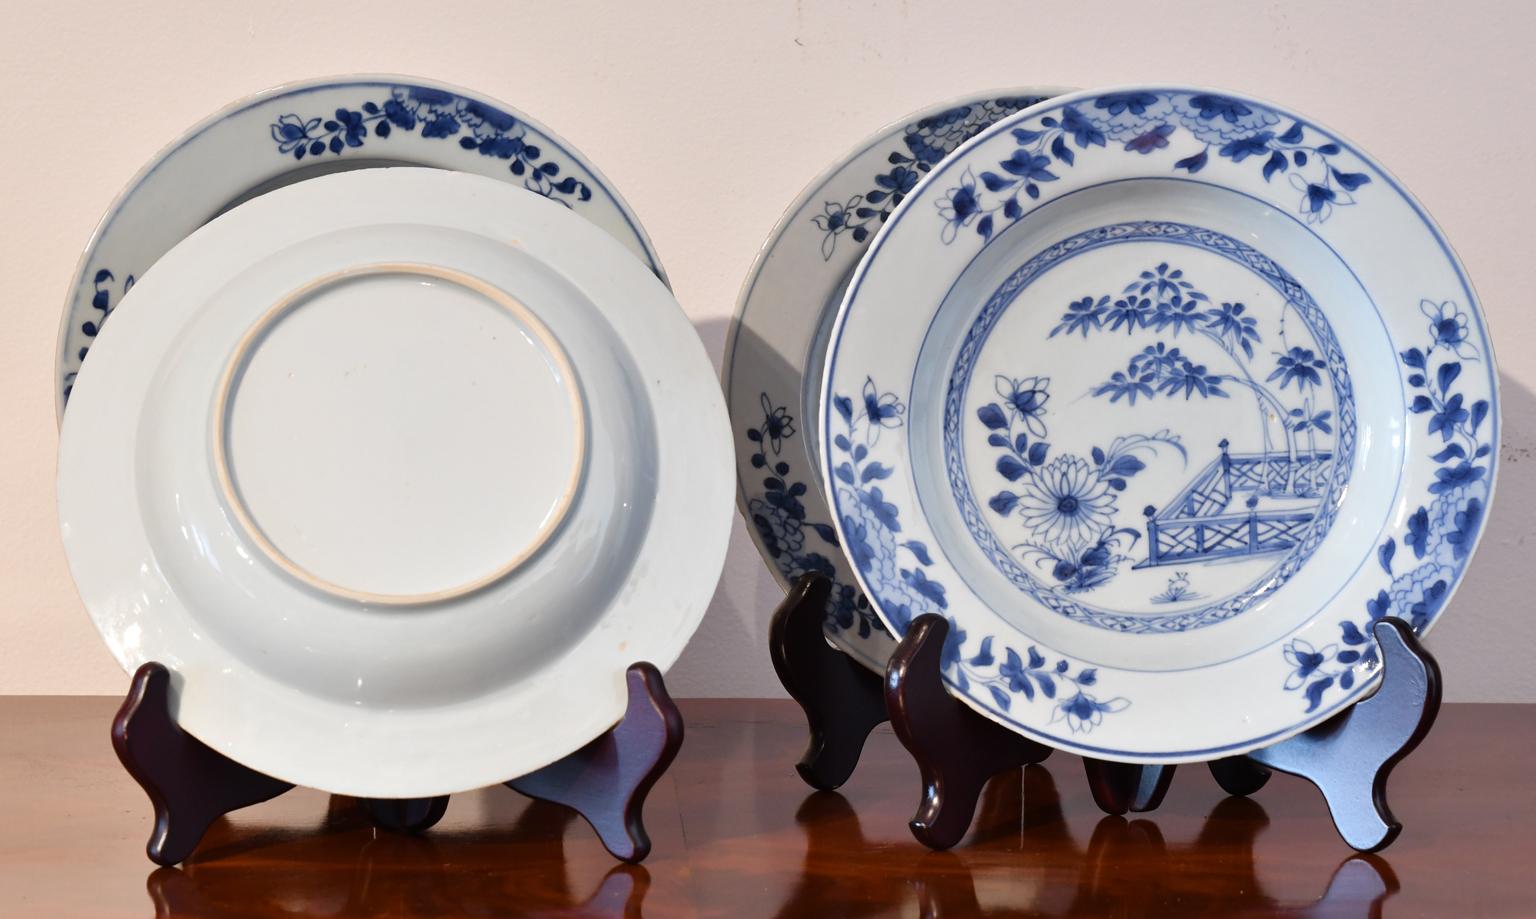 A set of four (4) Qing Qianlong porcelain ware comprising two shallow bowls and two plates with hand-painted cobalt blue decorations depicting in the central well a bamboo tree within a fenced veranda setting and other flora surrounded by a